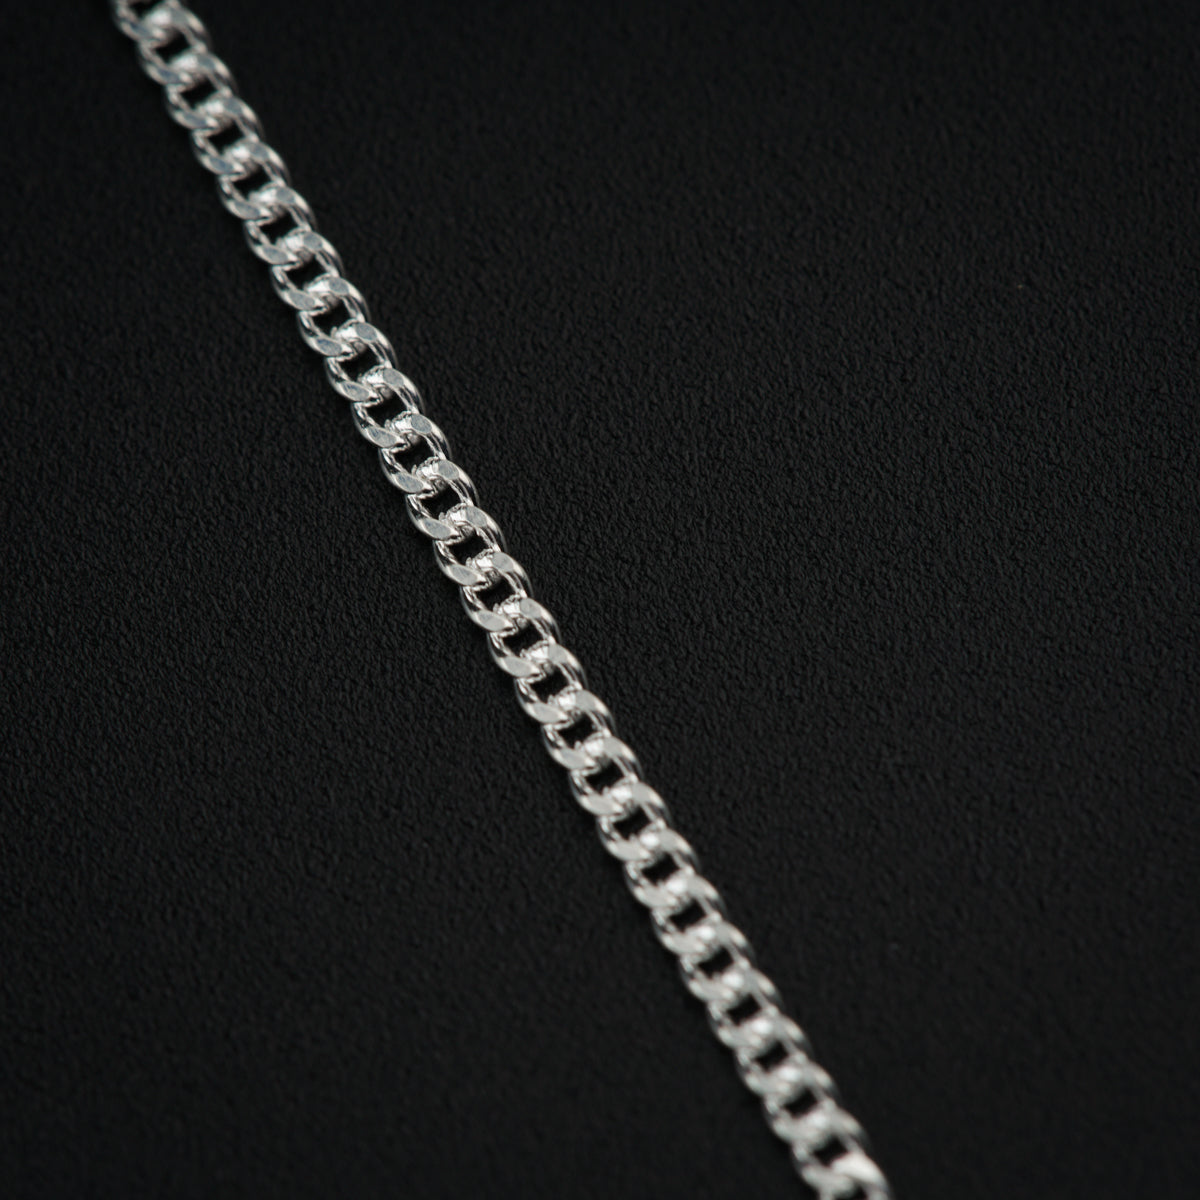 a close up of a silver chain on a black background